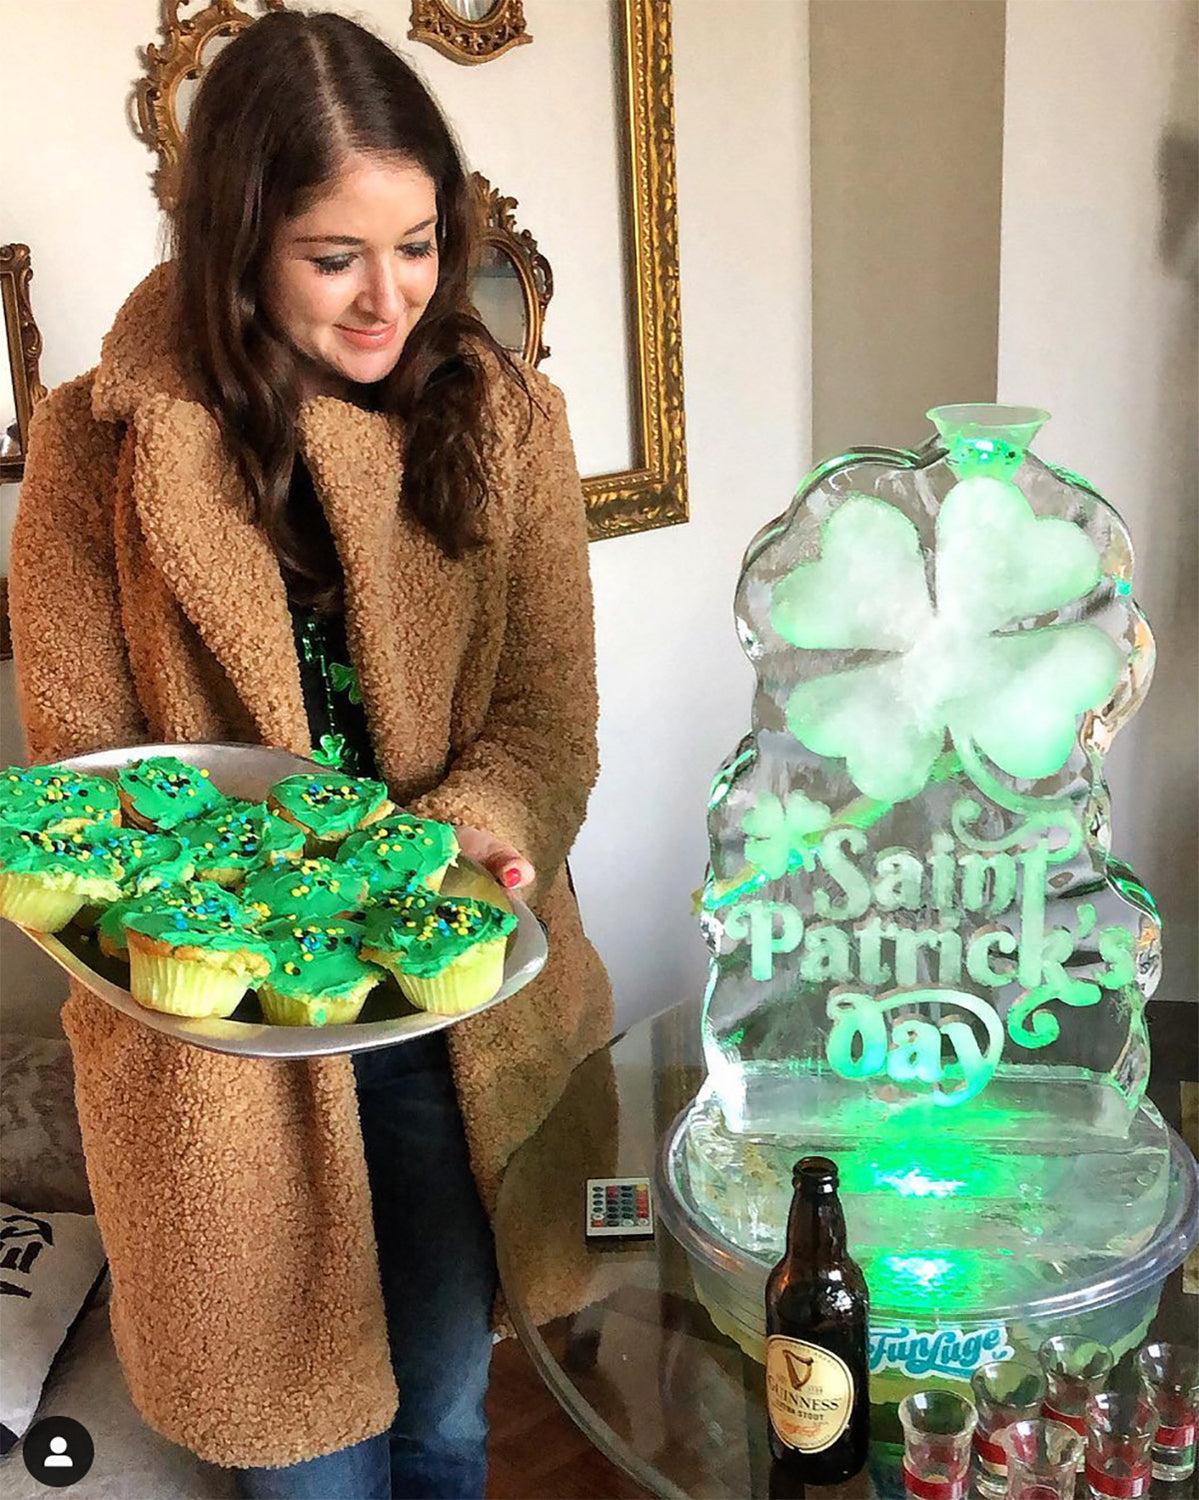 Gallery – Fun Luge - NYC Party Ice Sculpture